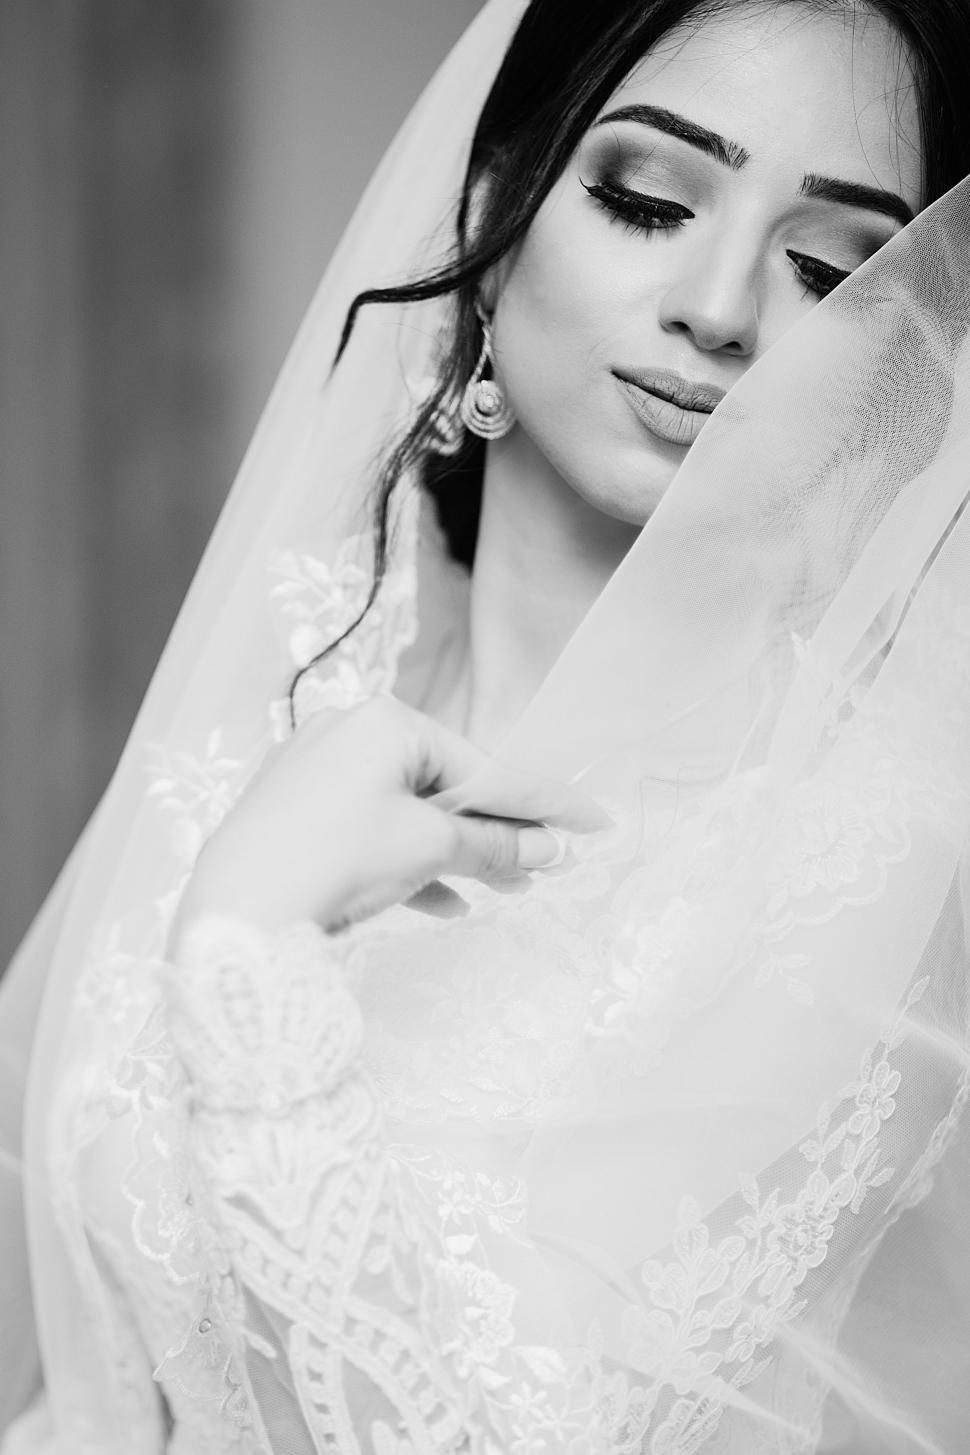 Free Image of Woman in Wedding Dress and Veil Walking Down Aisle 